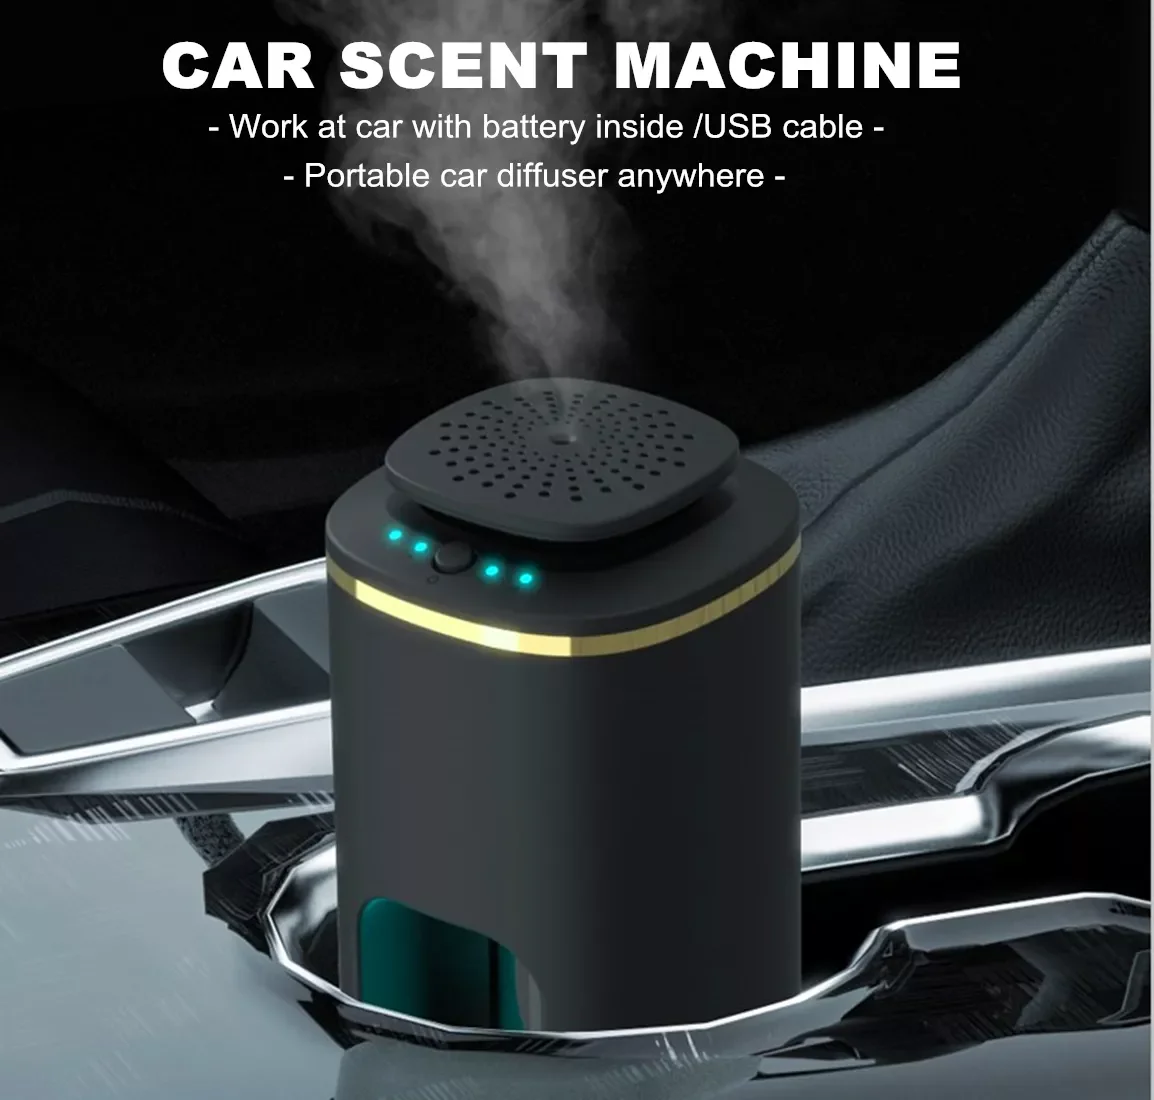 Car Diffuser Perfume Rechargeable 10m2 Area 10ml Refil Bottle Air Freshener Nebulizer Machine Smell Diffusor Essential Oil enlarge